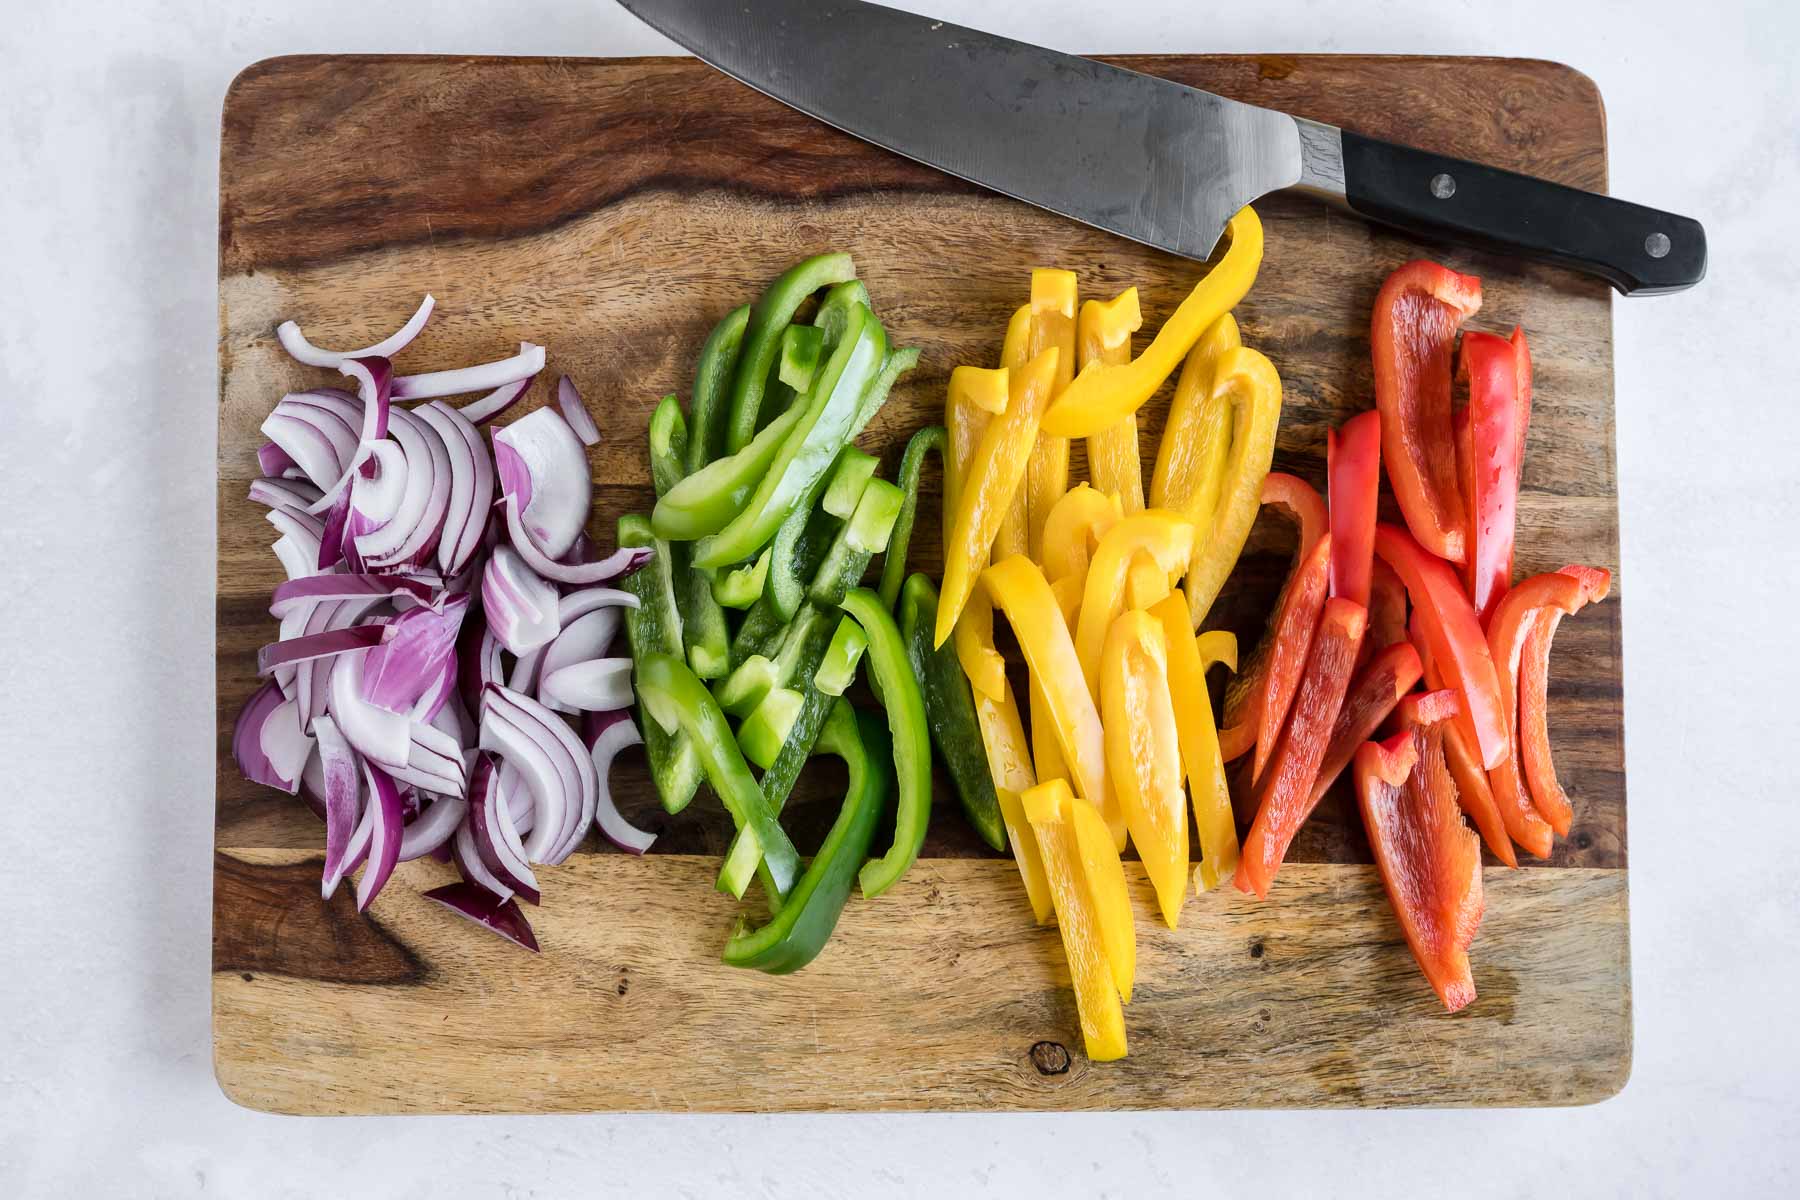 Onion and bell peppers are thinly sliced.